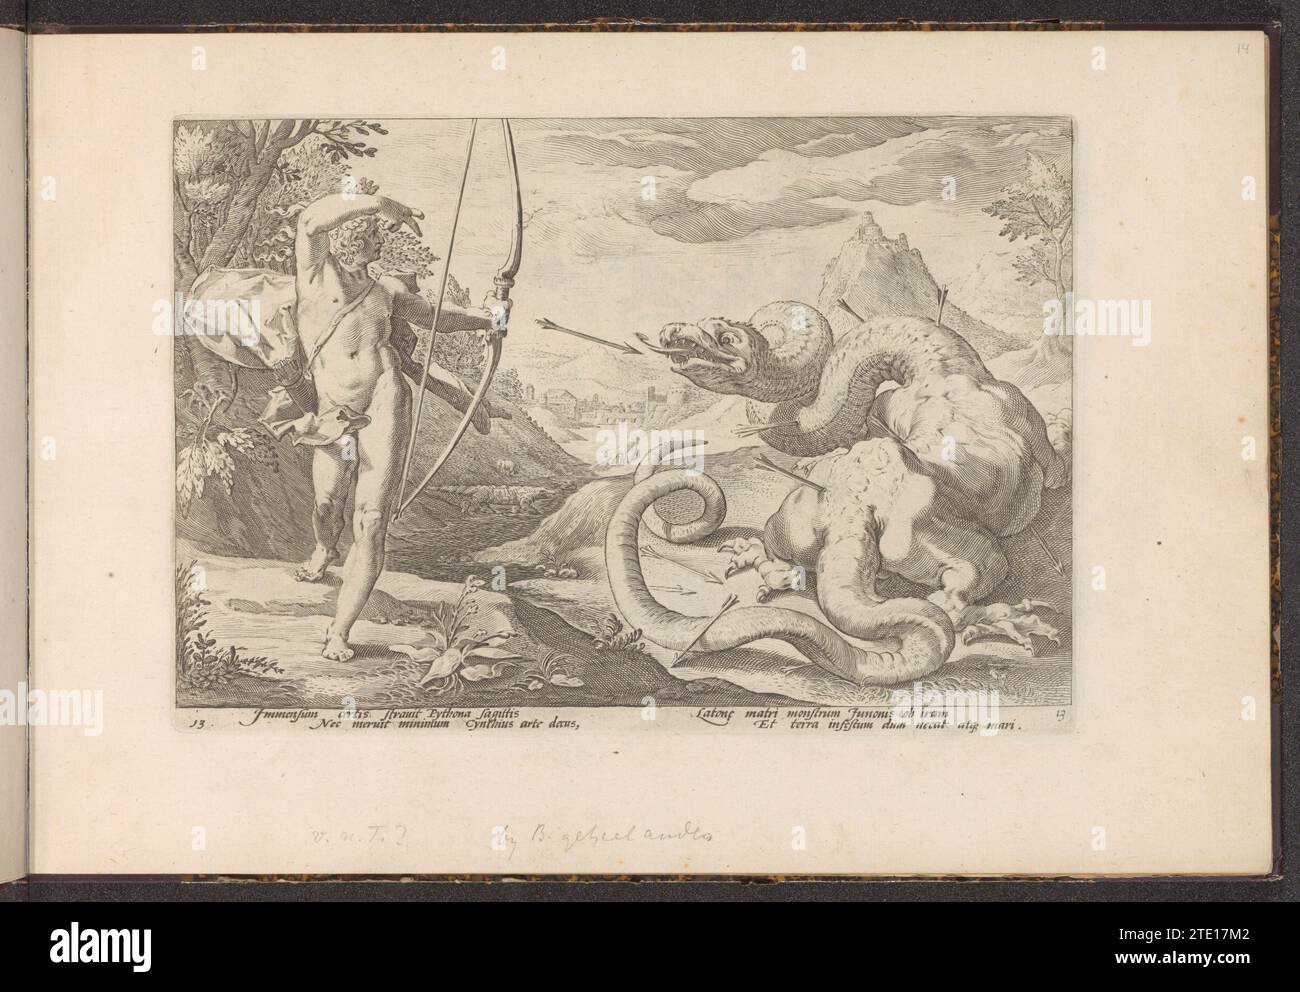 Apollo kills the giant snake Python, 1728 Apollo kills the giant snake Python with many arrows (here more like a dragon, with legs). A crocodile, sheep and deer run in the background. Two times two verses in Latin under the performance. The print is part of an album. print maker: Haarlemafter design by: Haarlempublisher: Amsterdam paper engraving Apollo kills the giant snake Python with many arrows (here more like a dragon, with legs). A crocodile, sheep and deer run in the background. Two times two verses in Latin under the performance. The print is part of an album. print maker: Haarlemafter Stock Photo